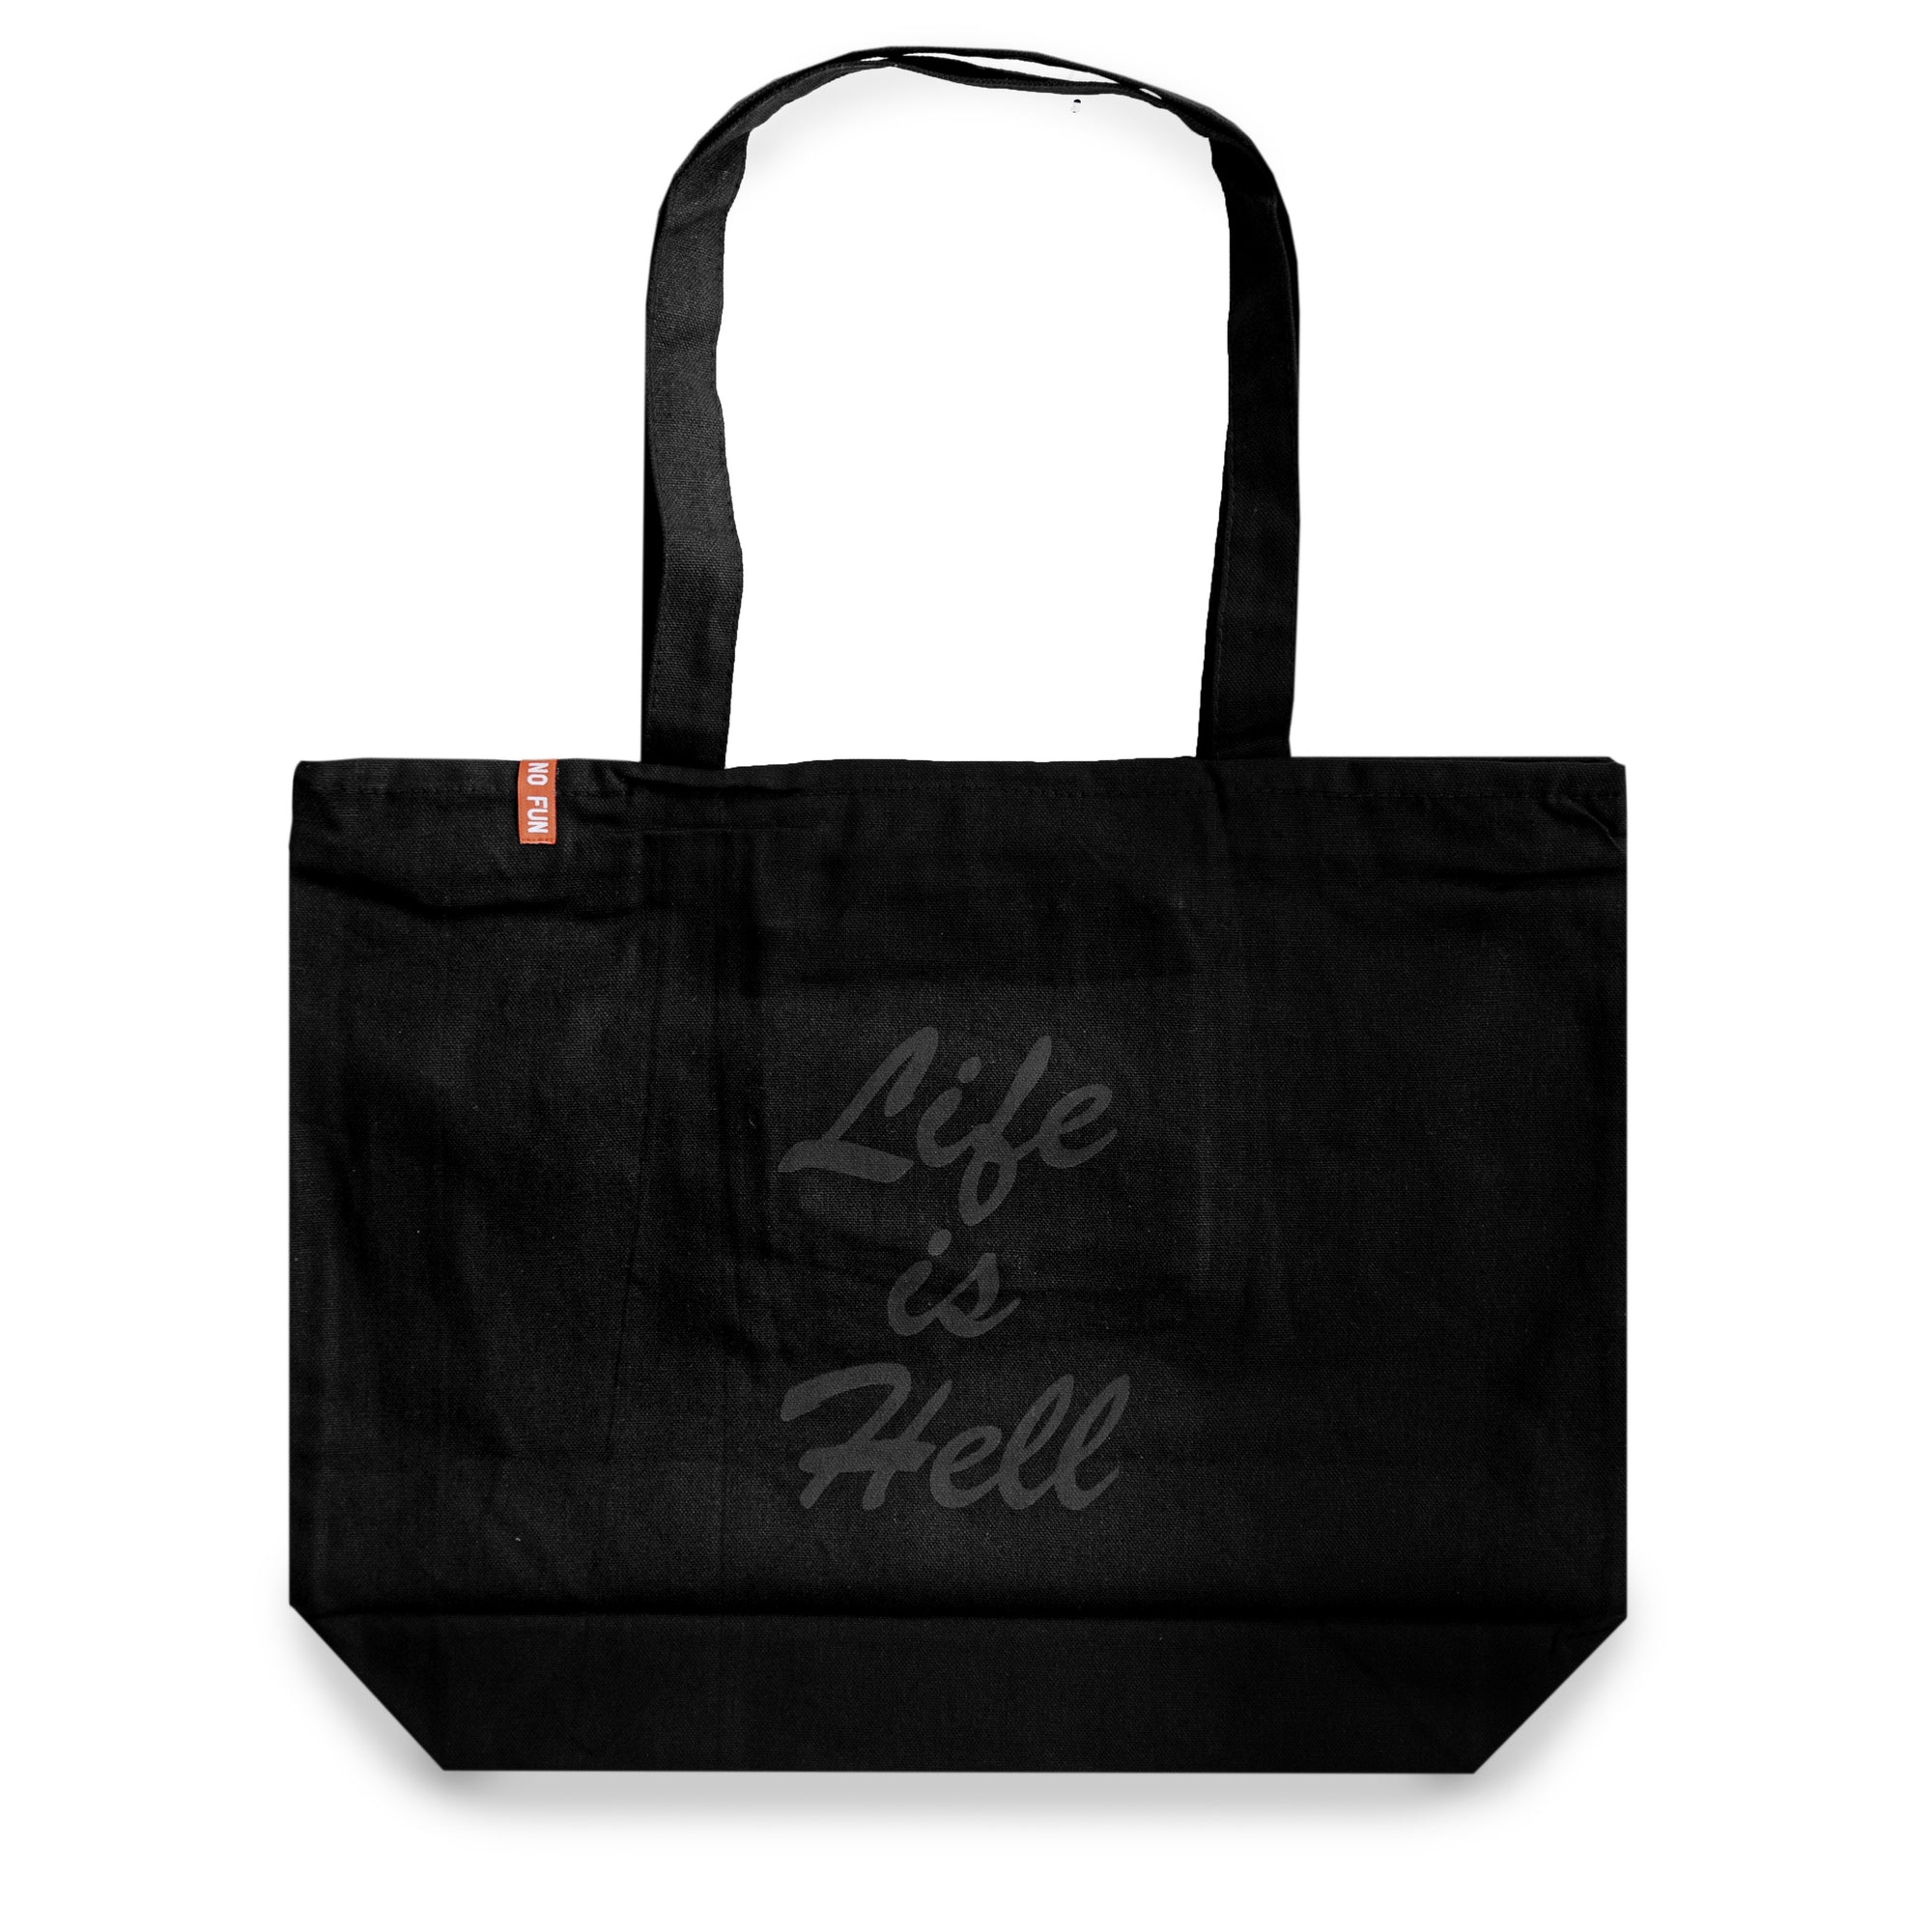 Black high-quality tote bag with black text in a brush script that reads "Life is hell". Red No Fun® logo tag on the top left corner.